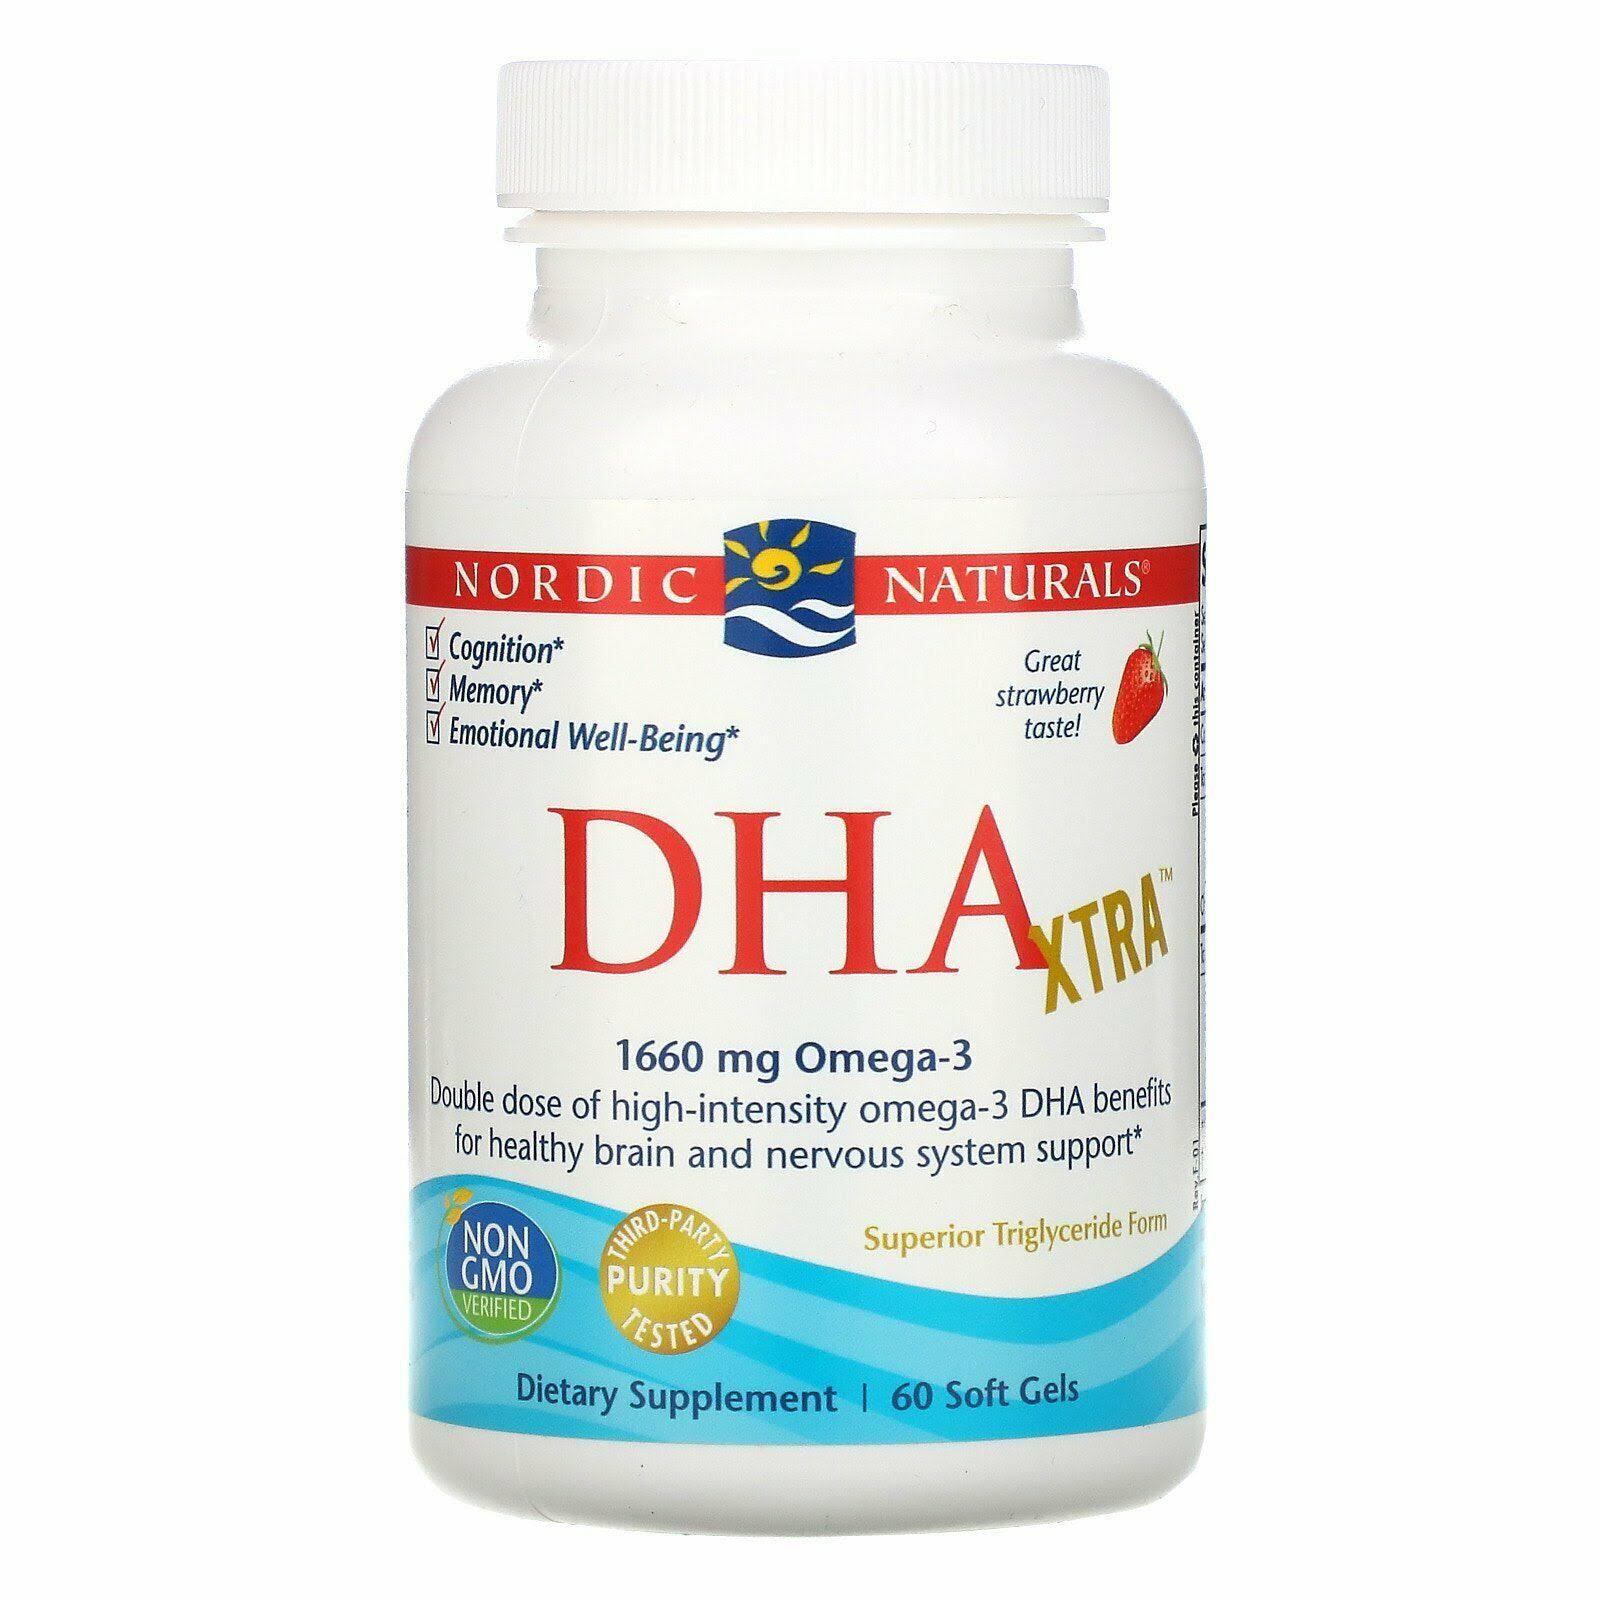 Nordic Naturals DHA Xtra Supplement - 60 Soft Gels, Strawberry